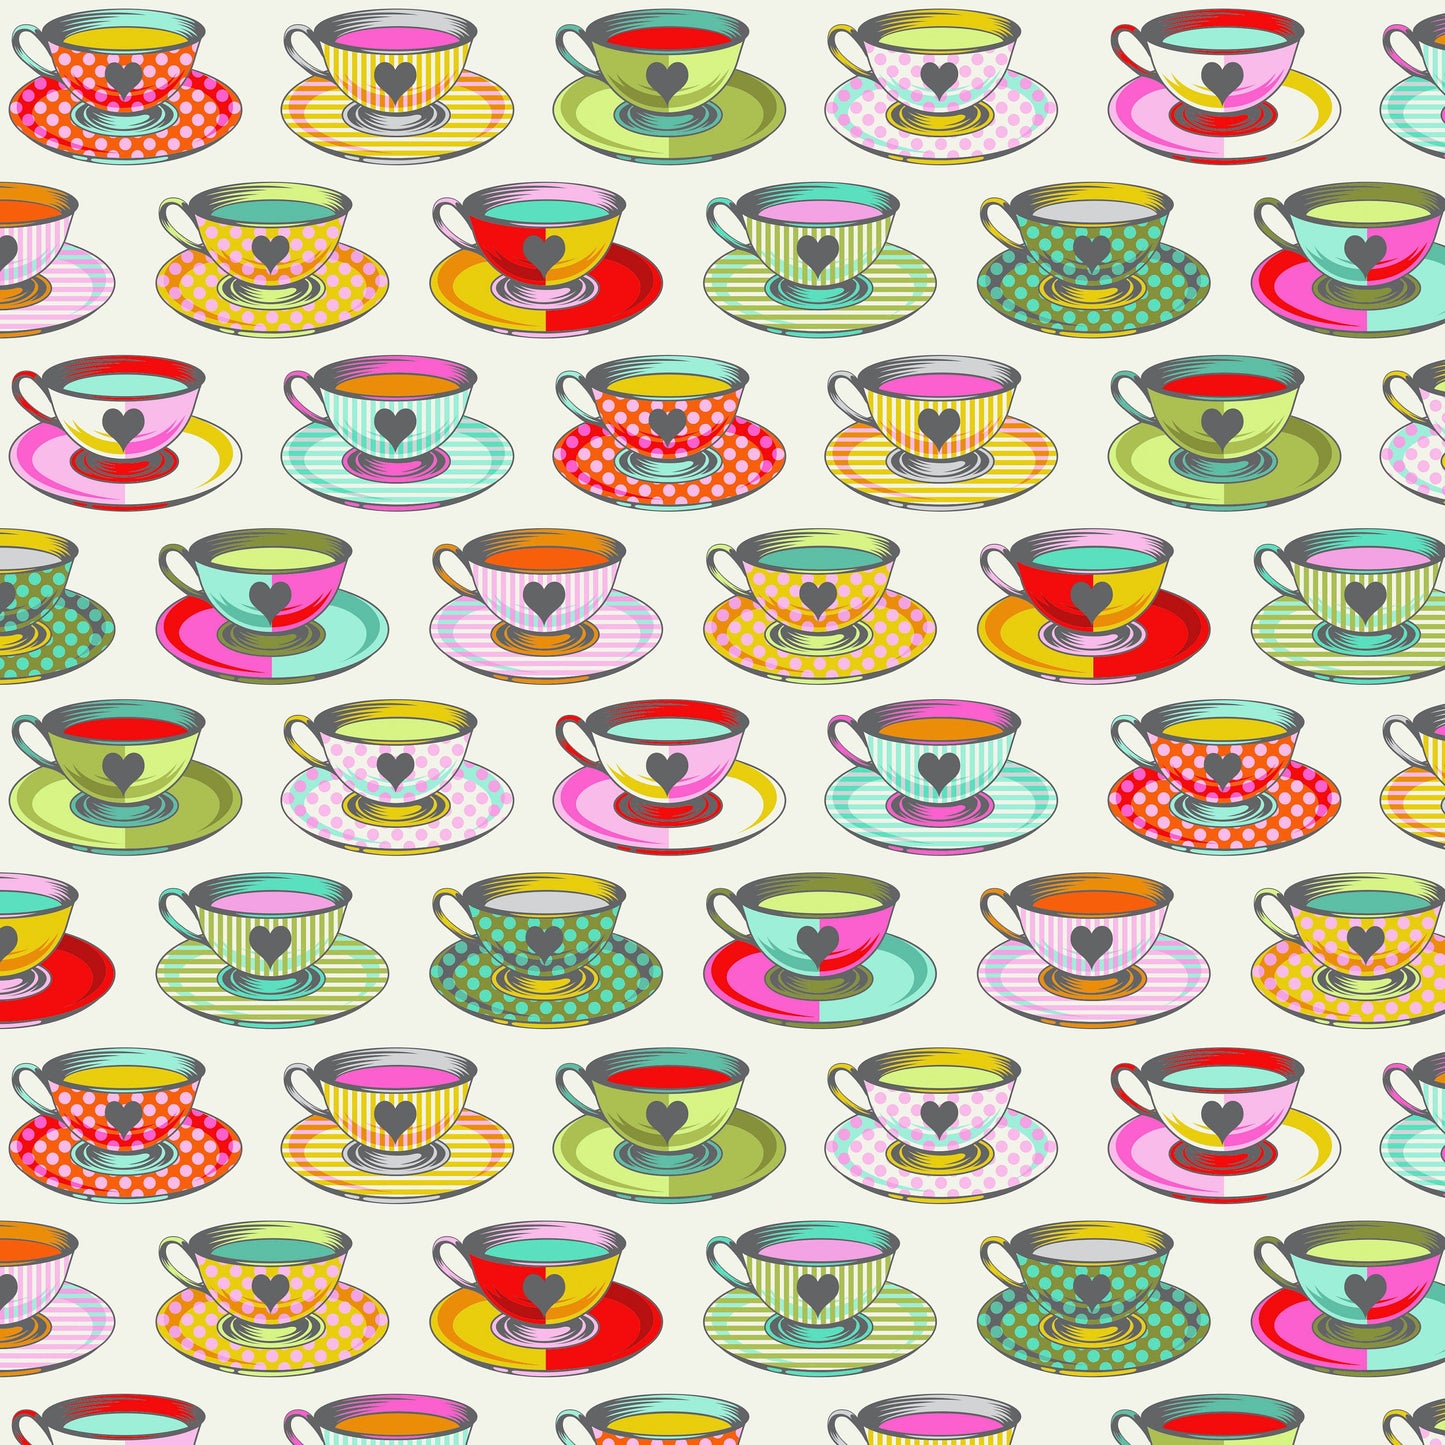 Tea Time in Sugar - Curiouser and Curiouser - Tula Pink